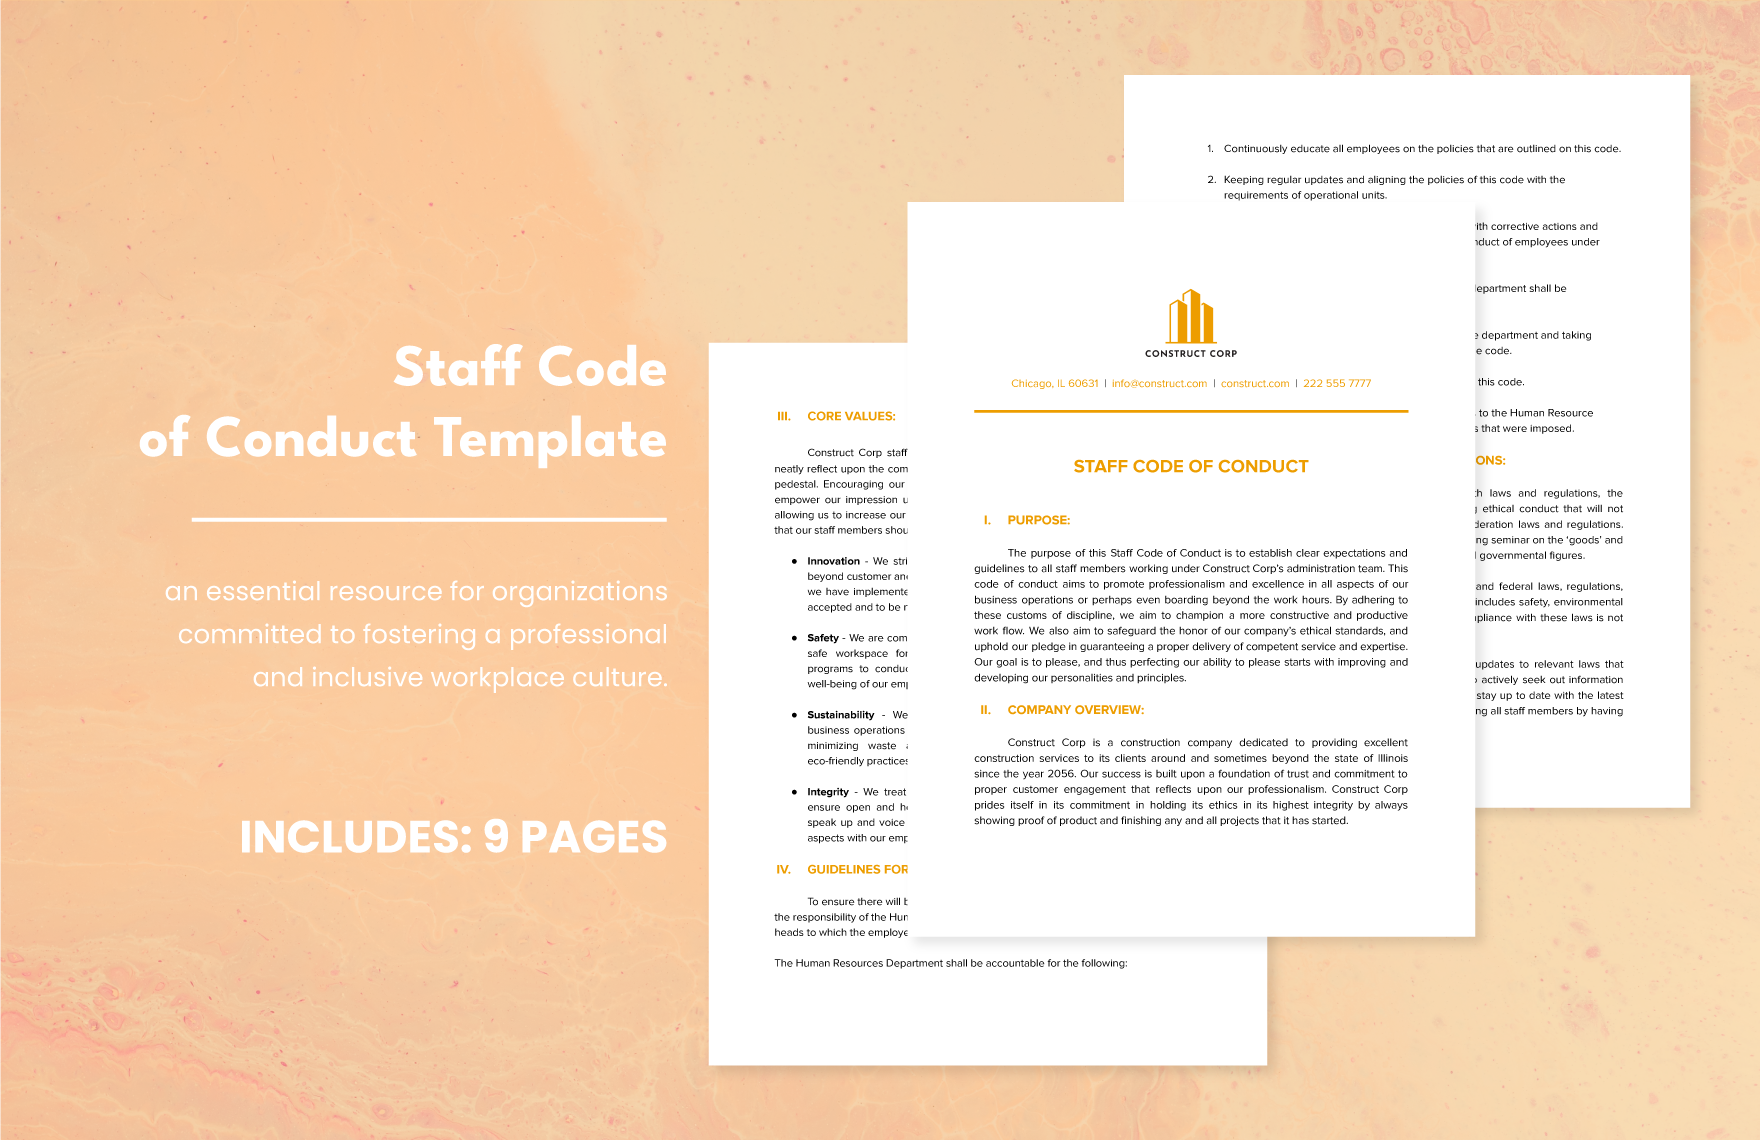 Staff Code of Conduct Template